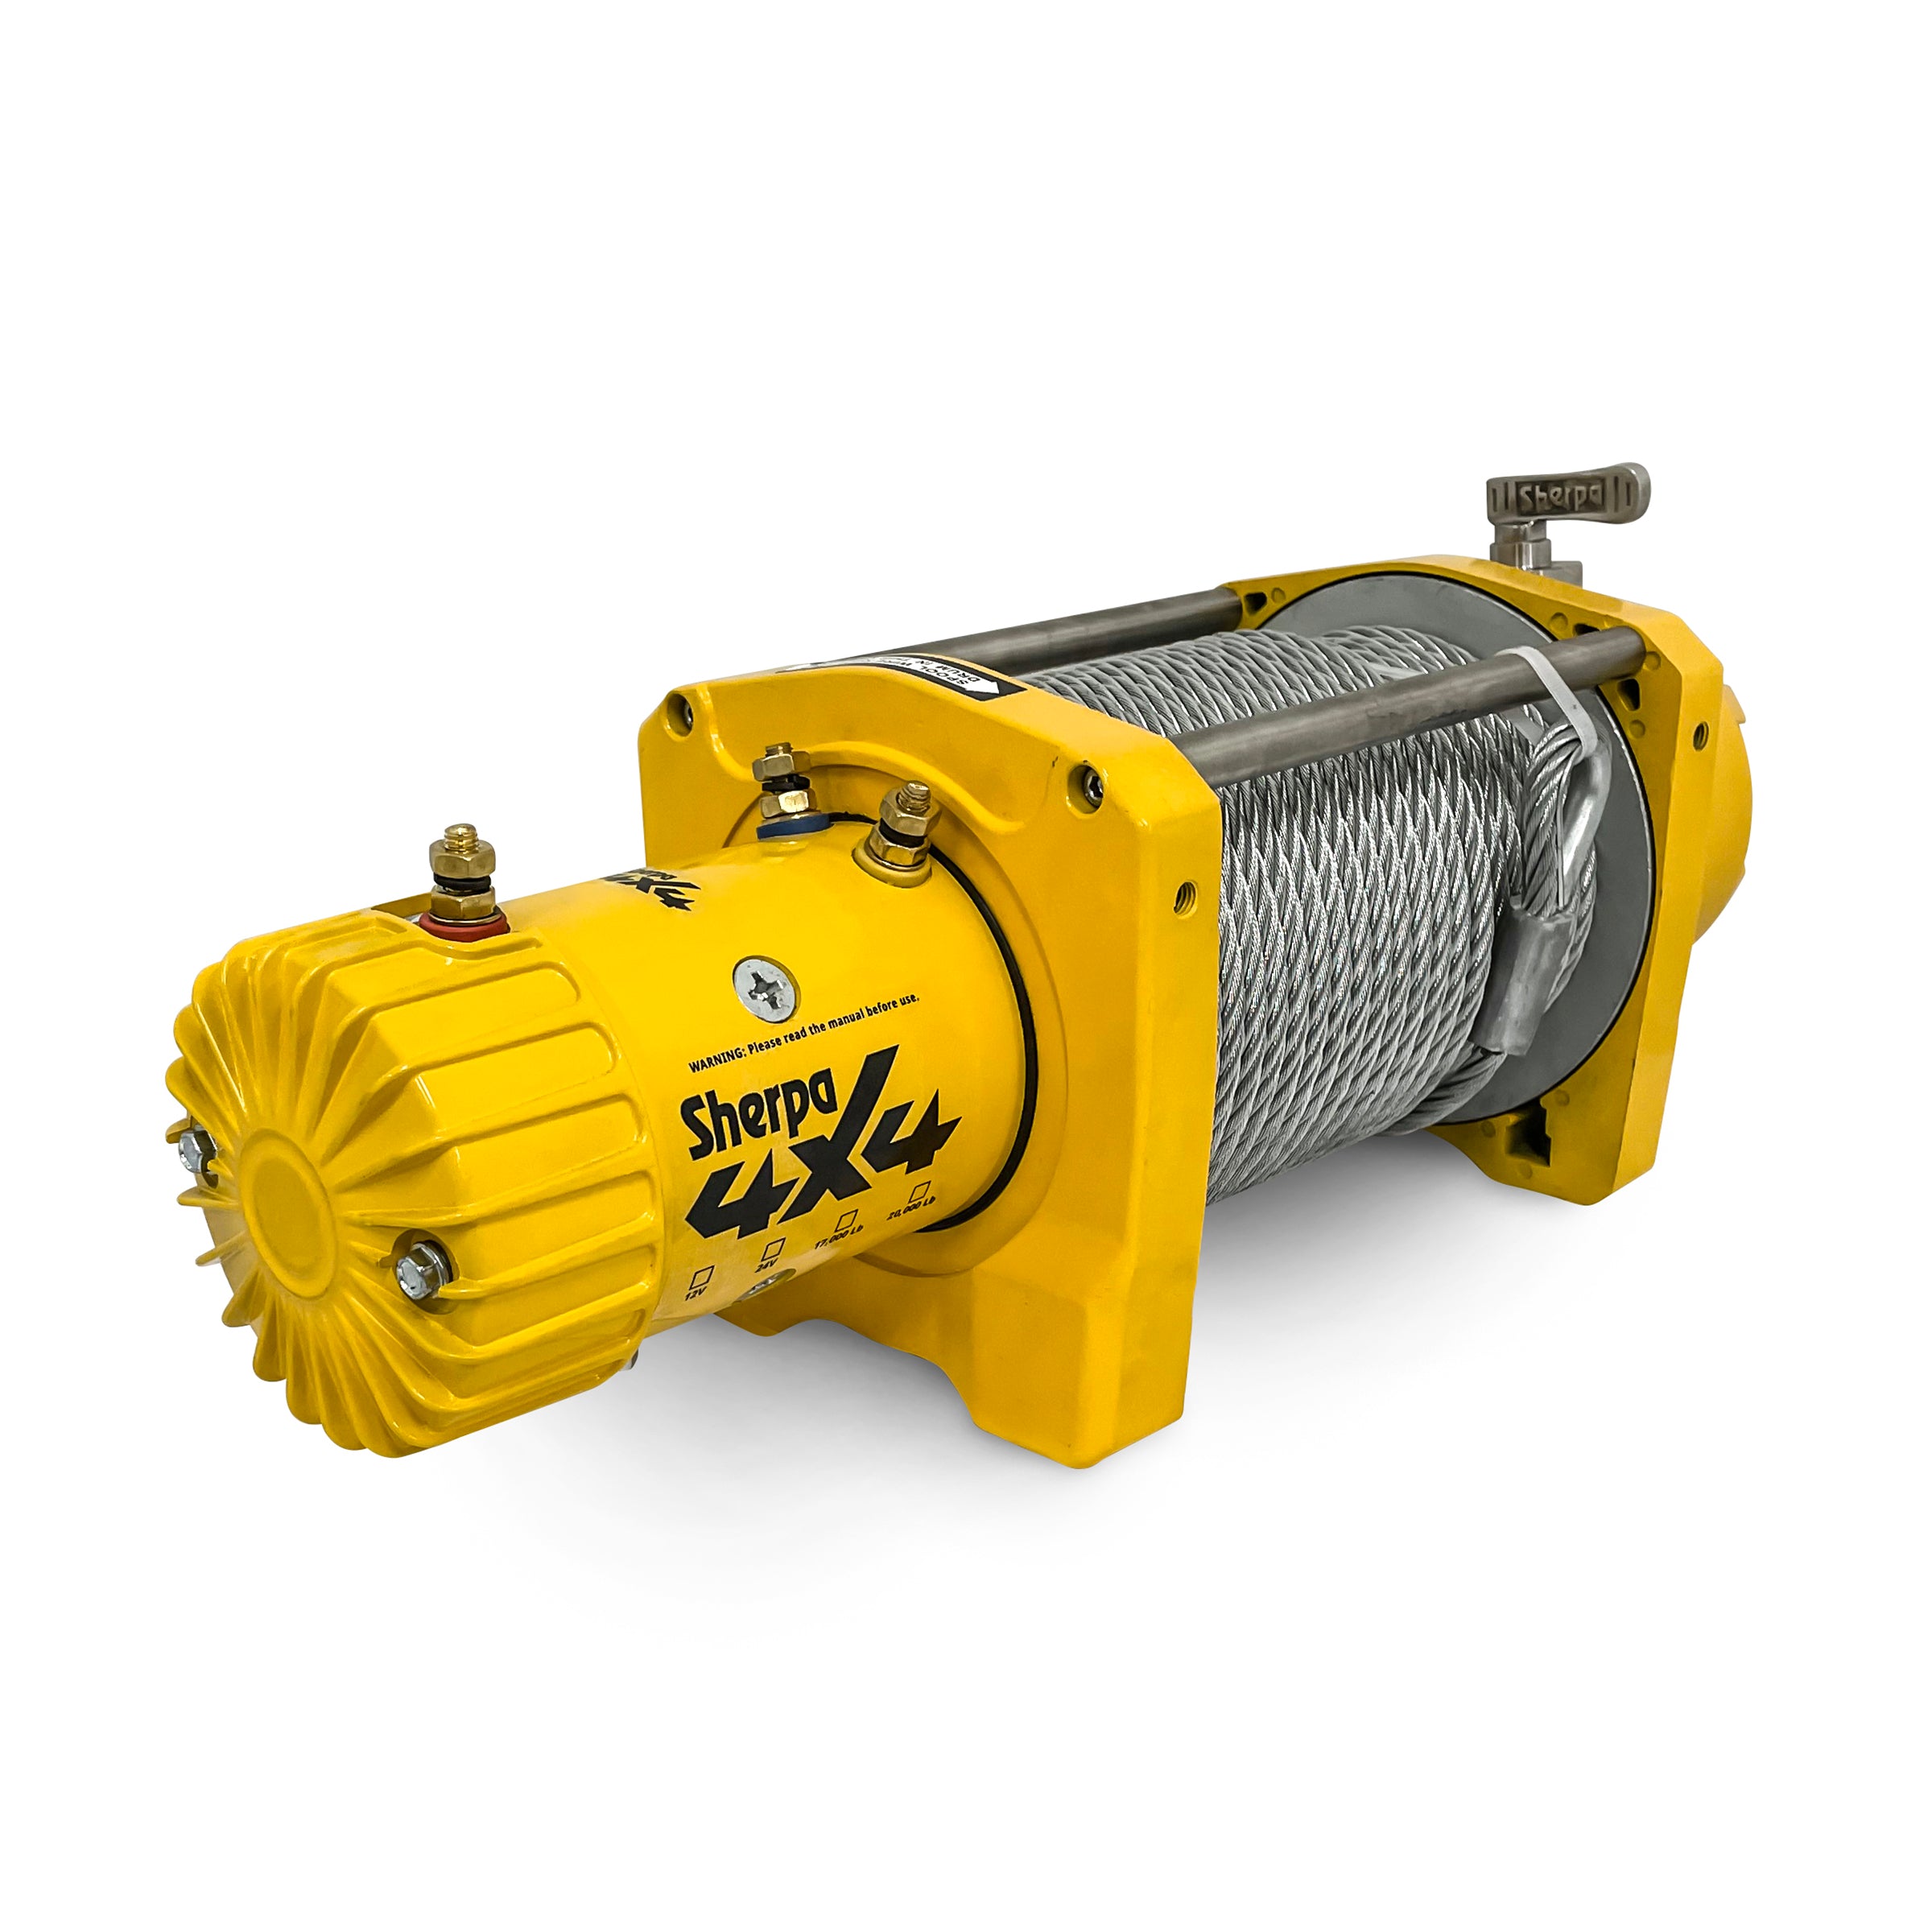 Sherpa 4x4 17,000Lb Cable | Rope Winch